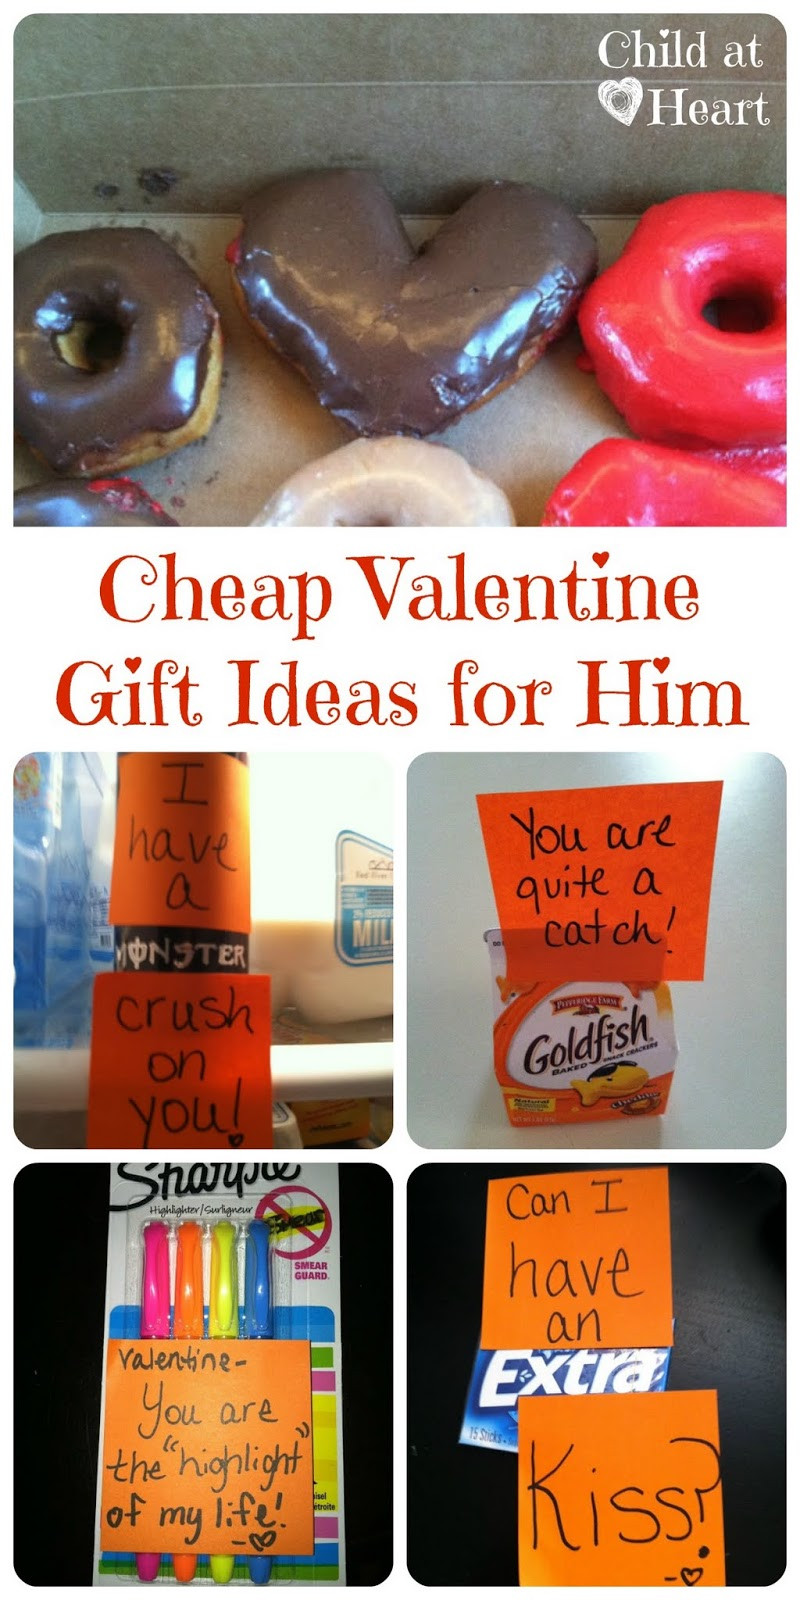 Valentines Day Gift Ideas For Fiance
 Cheap Valentine Gift Ideas for Him Child at Heart Blog